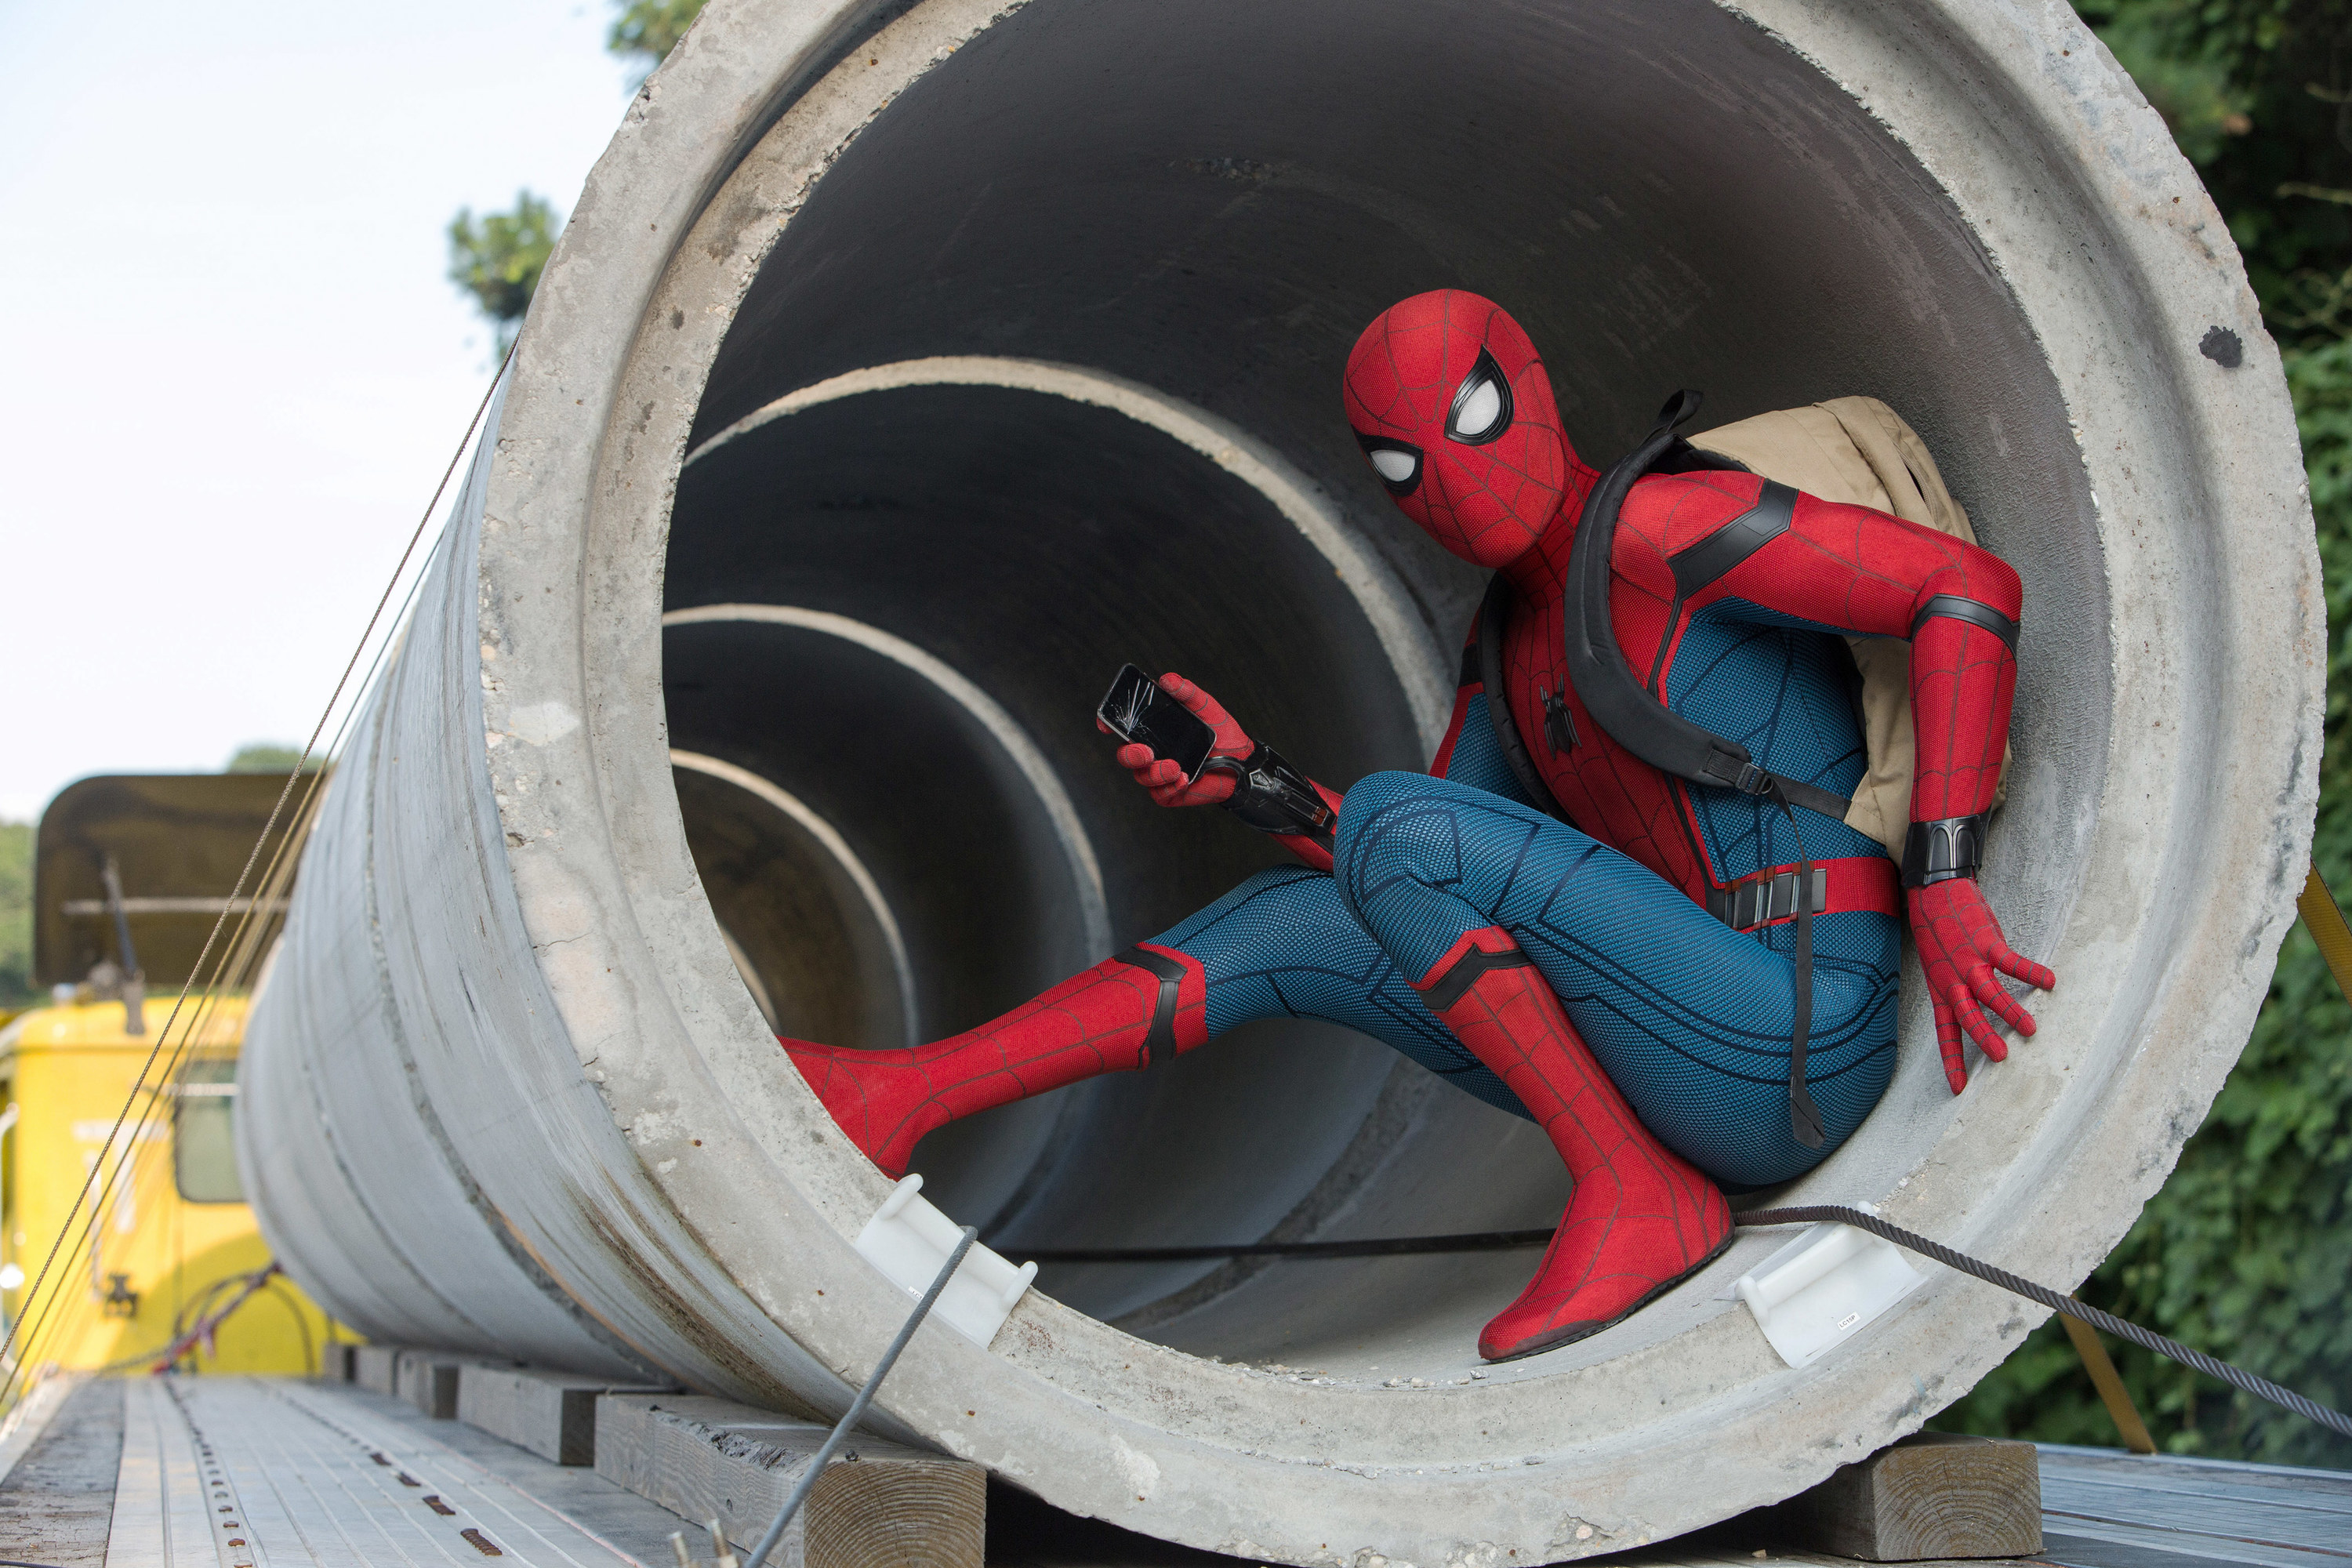 Spider-Man in a cement tube